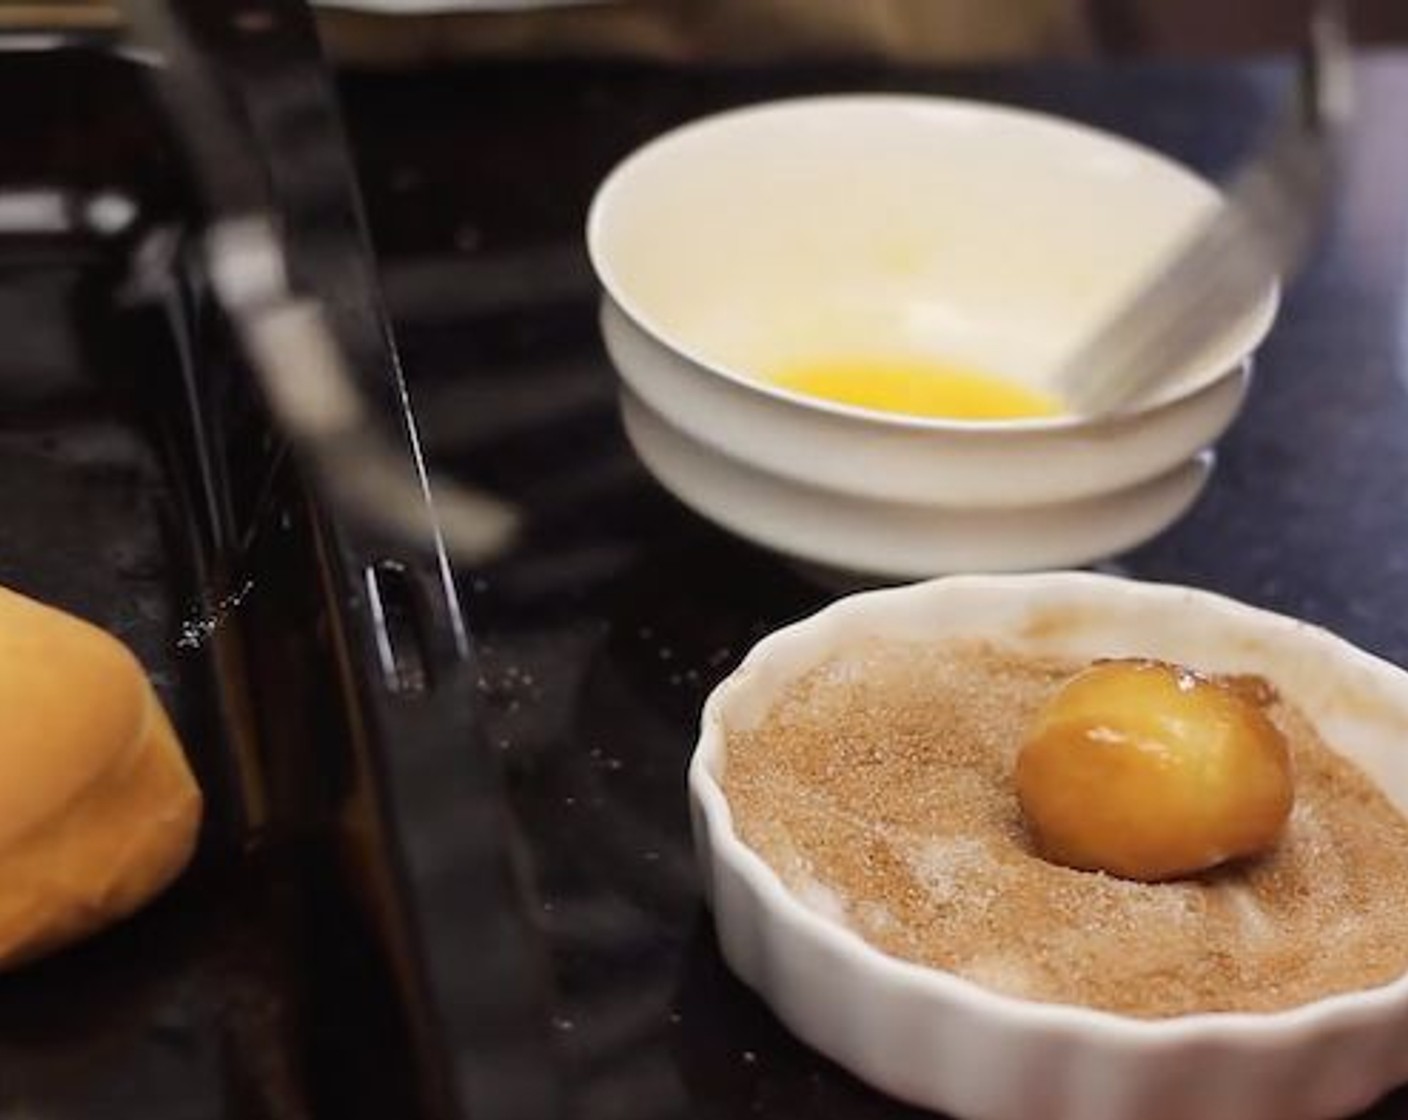 step 12 Immediately after baking, coat donut holes with butter and dust them with Ground Cinnamon (1 tsp) and Granulated Sugar (1/2 cup).